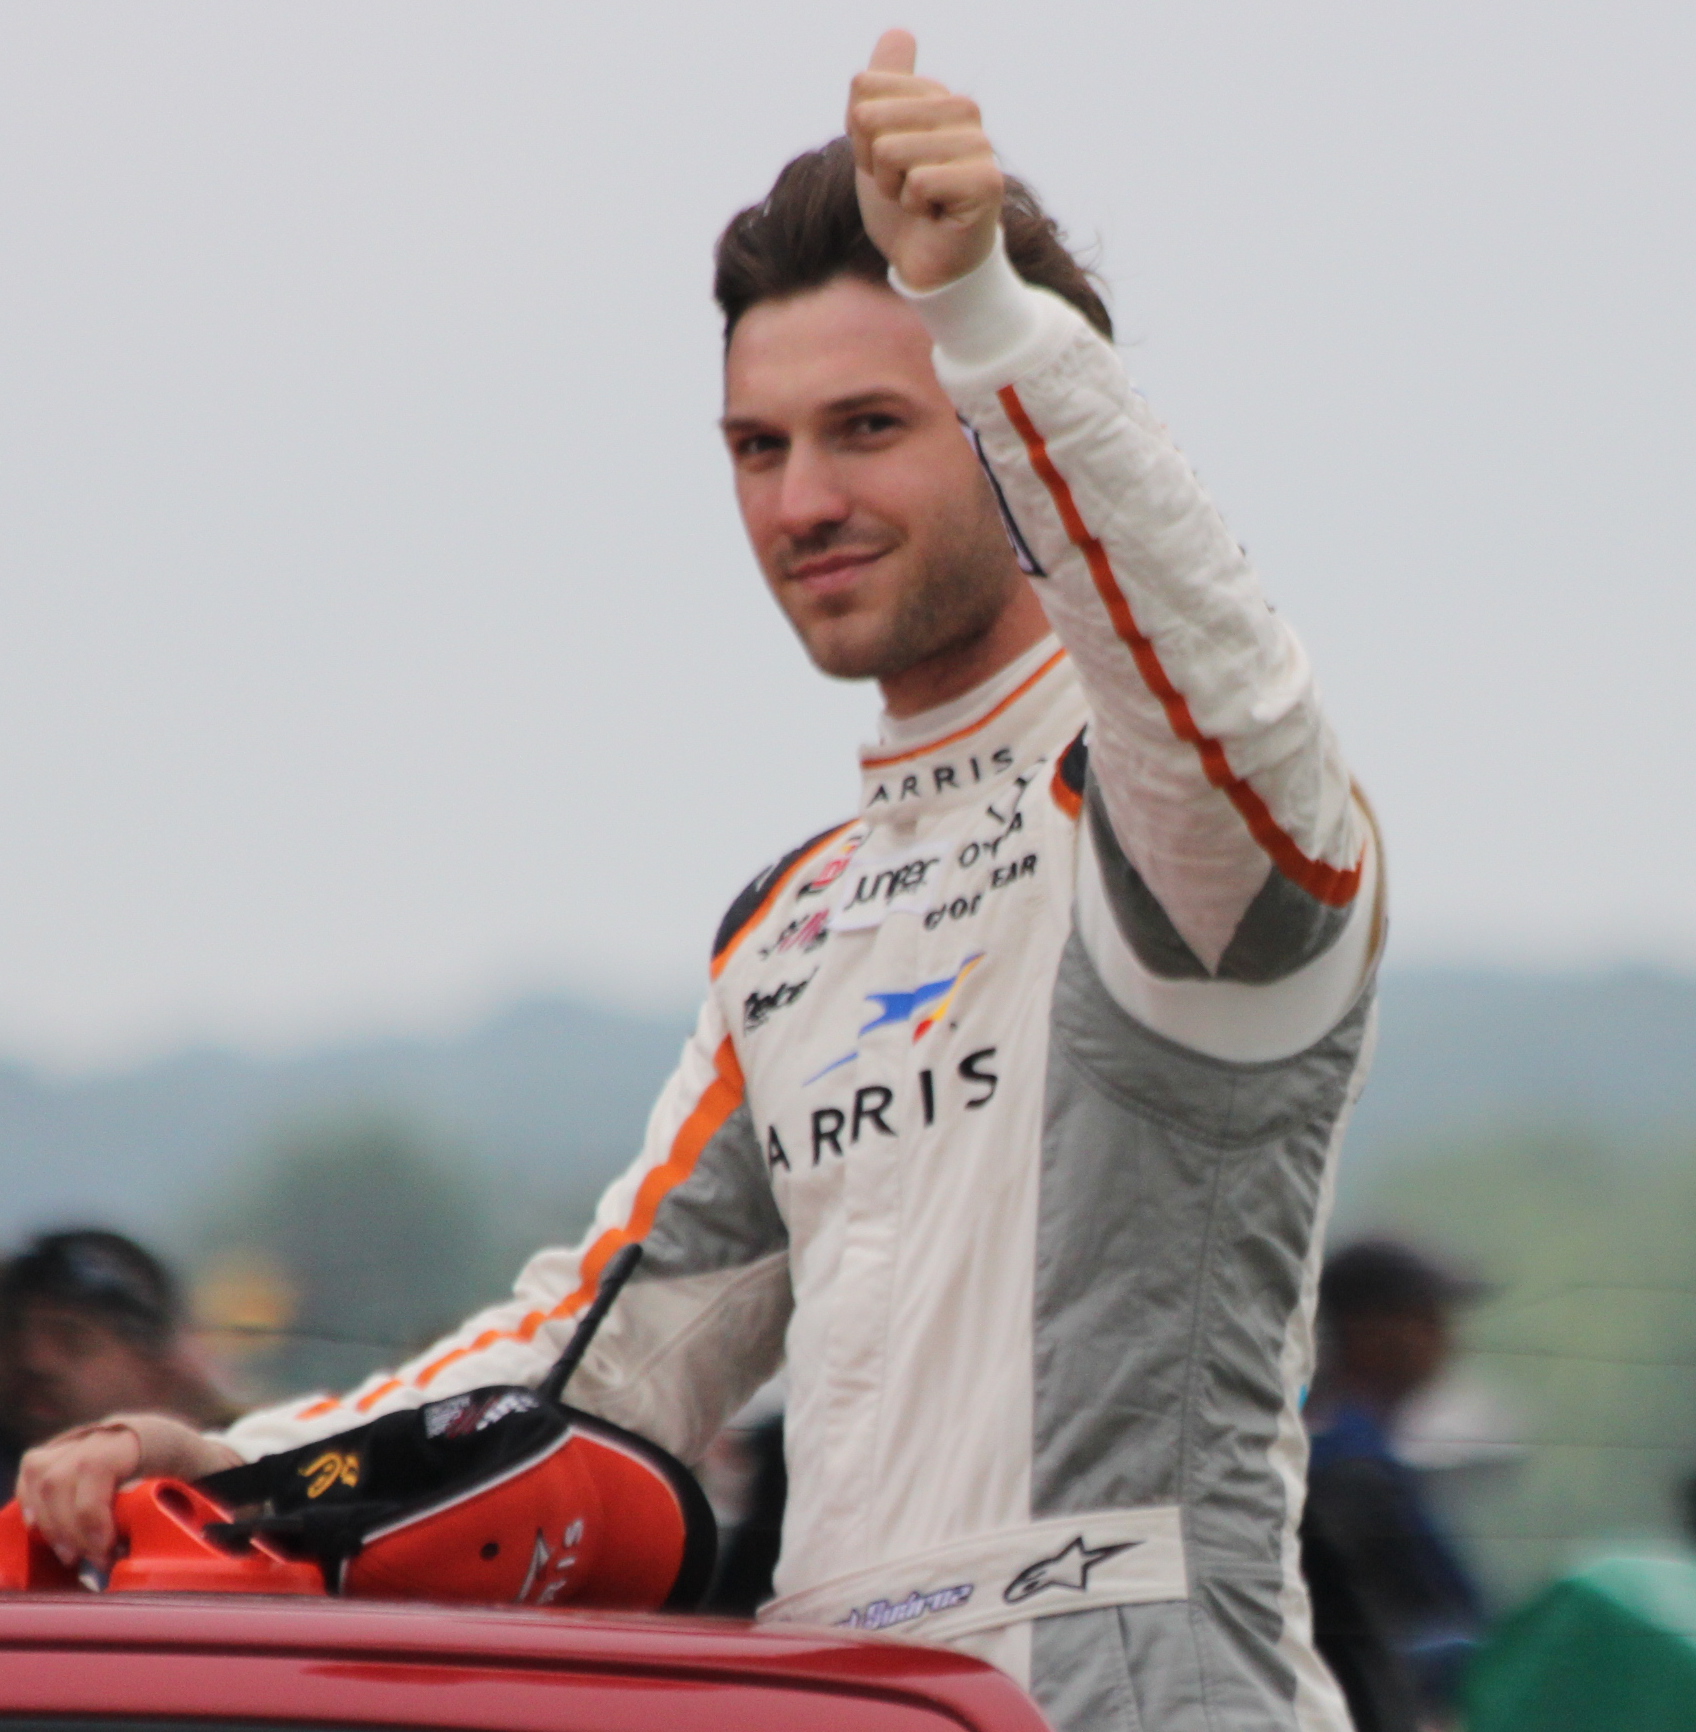 "Daniel Suarez Road America 2015" by Royalbroil - Own work. Licensed under CC BY-SA 4.0 via Commons.
